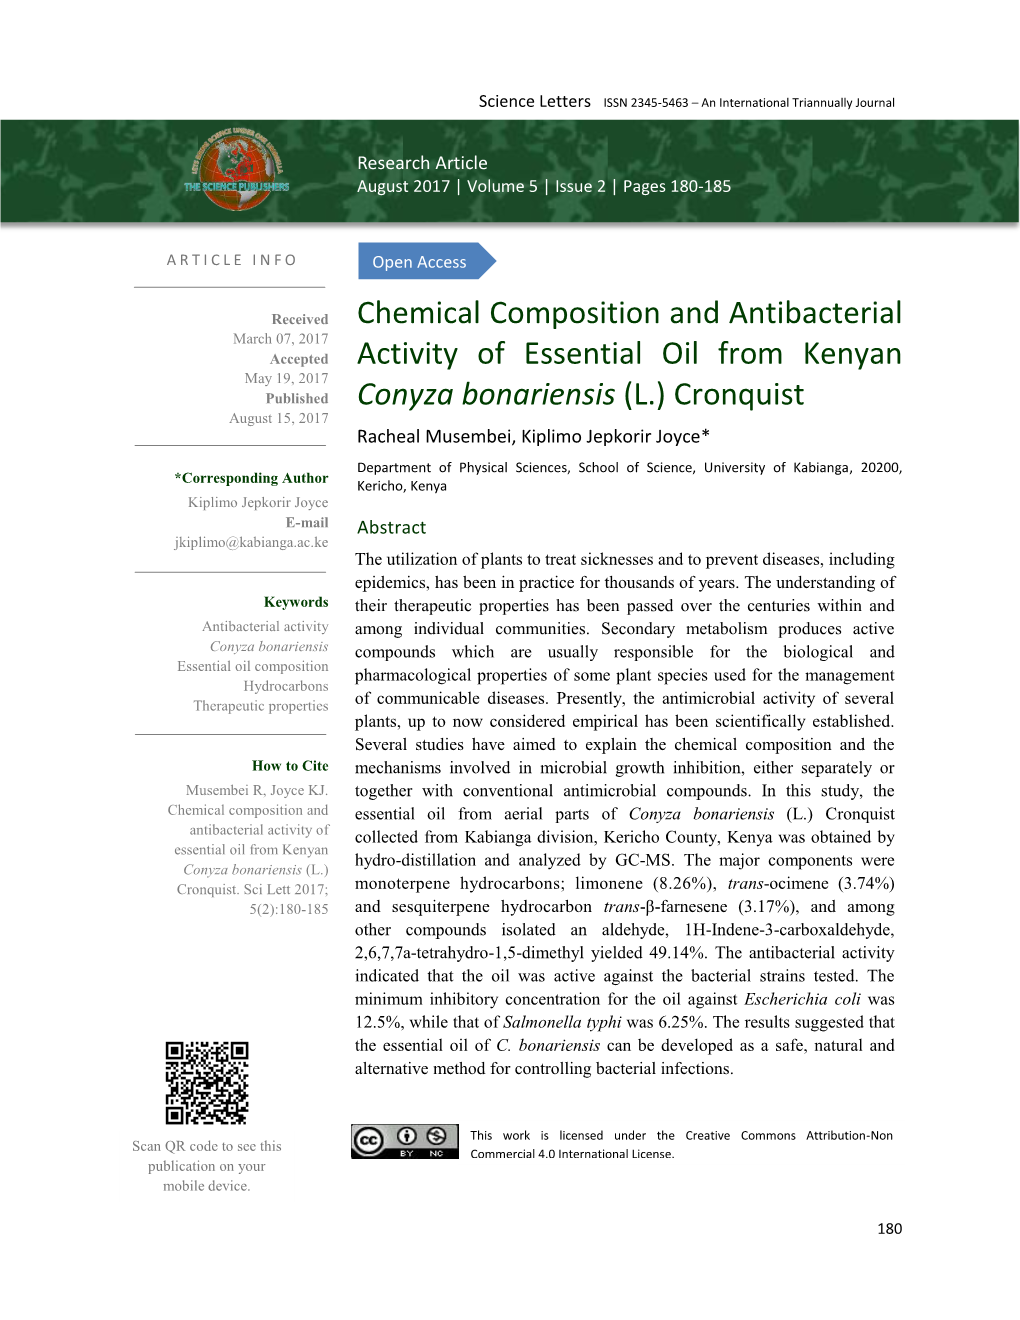 Chemical Composition and Antibacterial Activity of Essential Oil